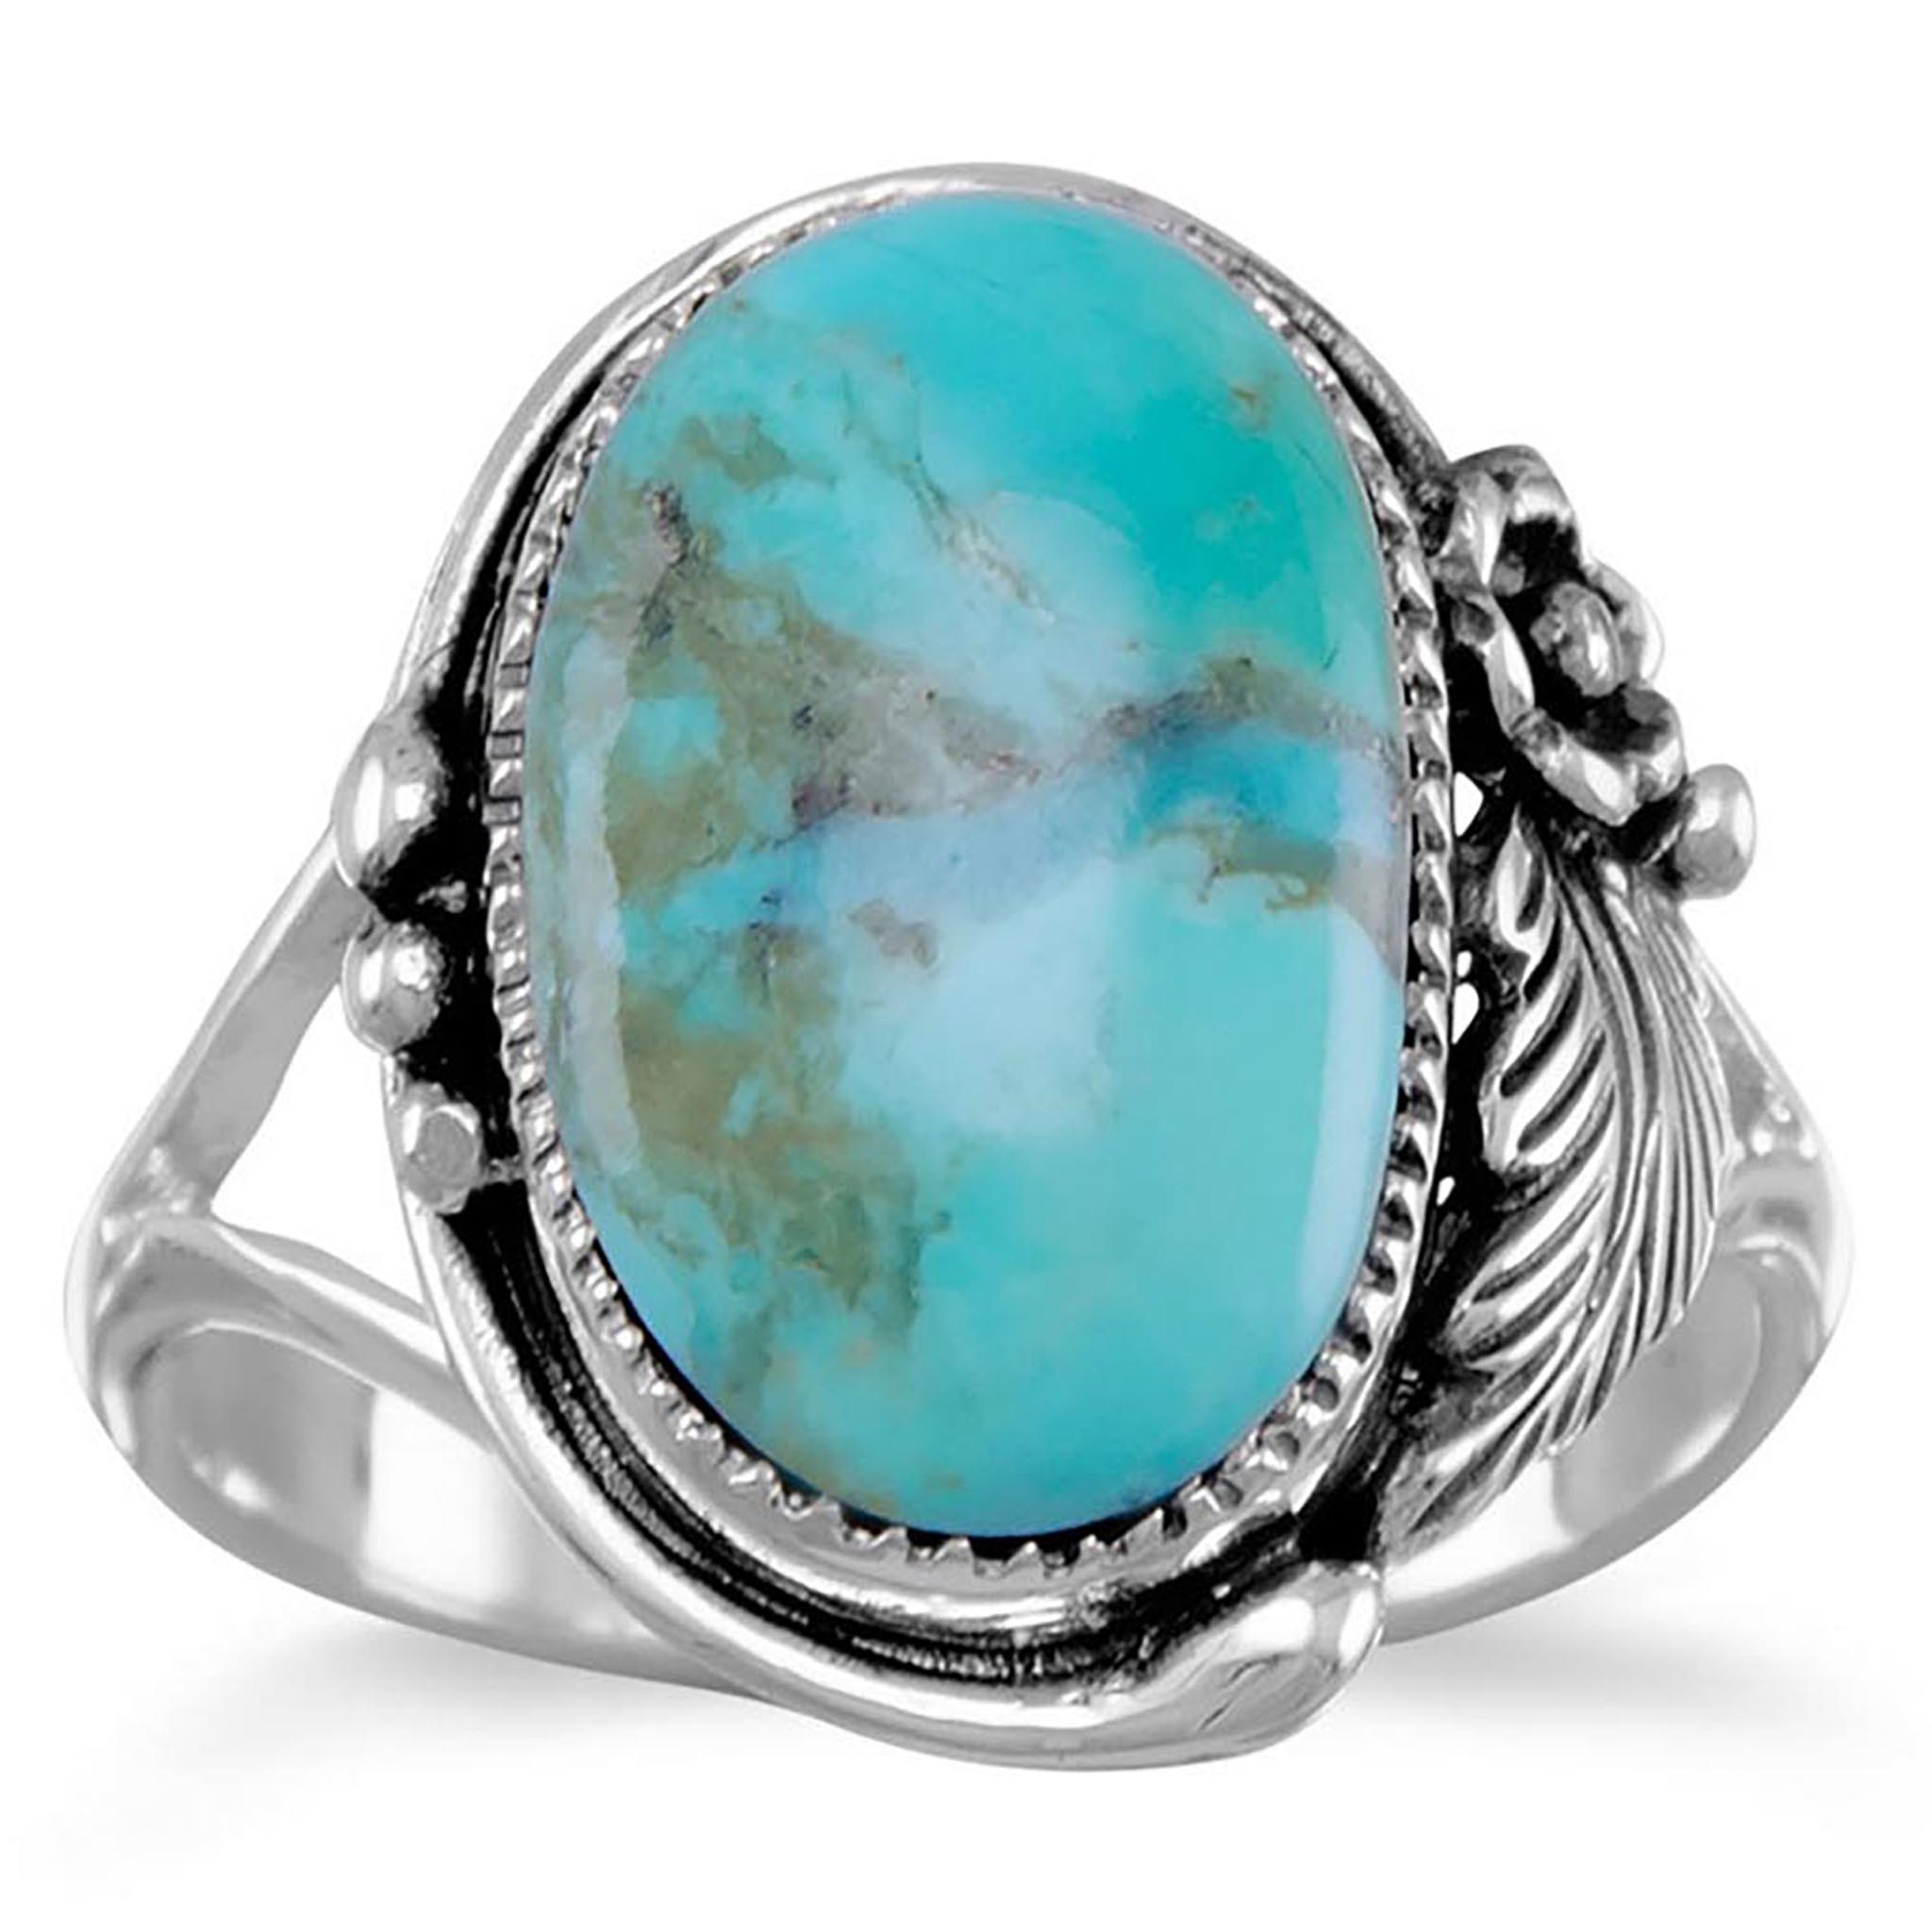 Turquoise Floral Design Ring